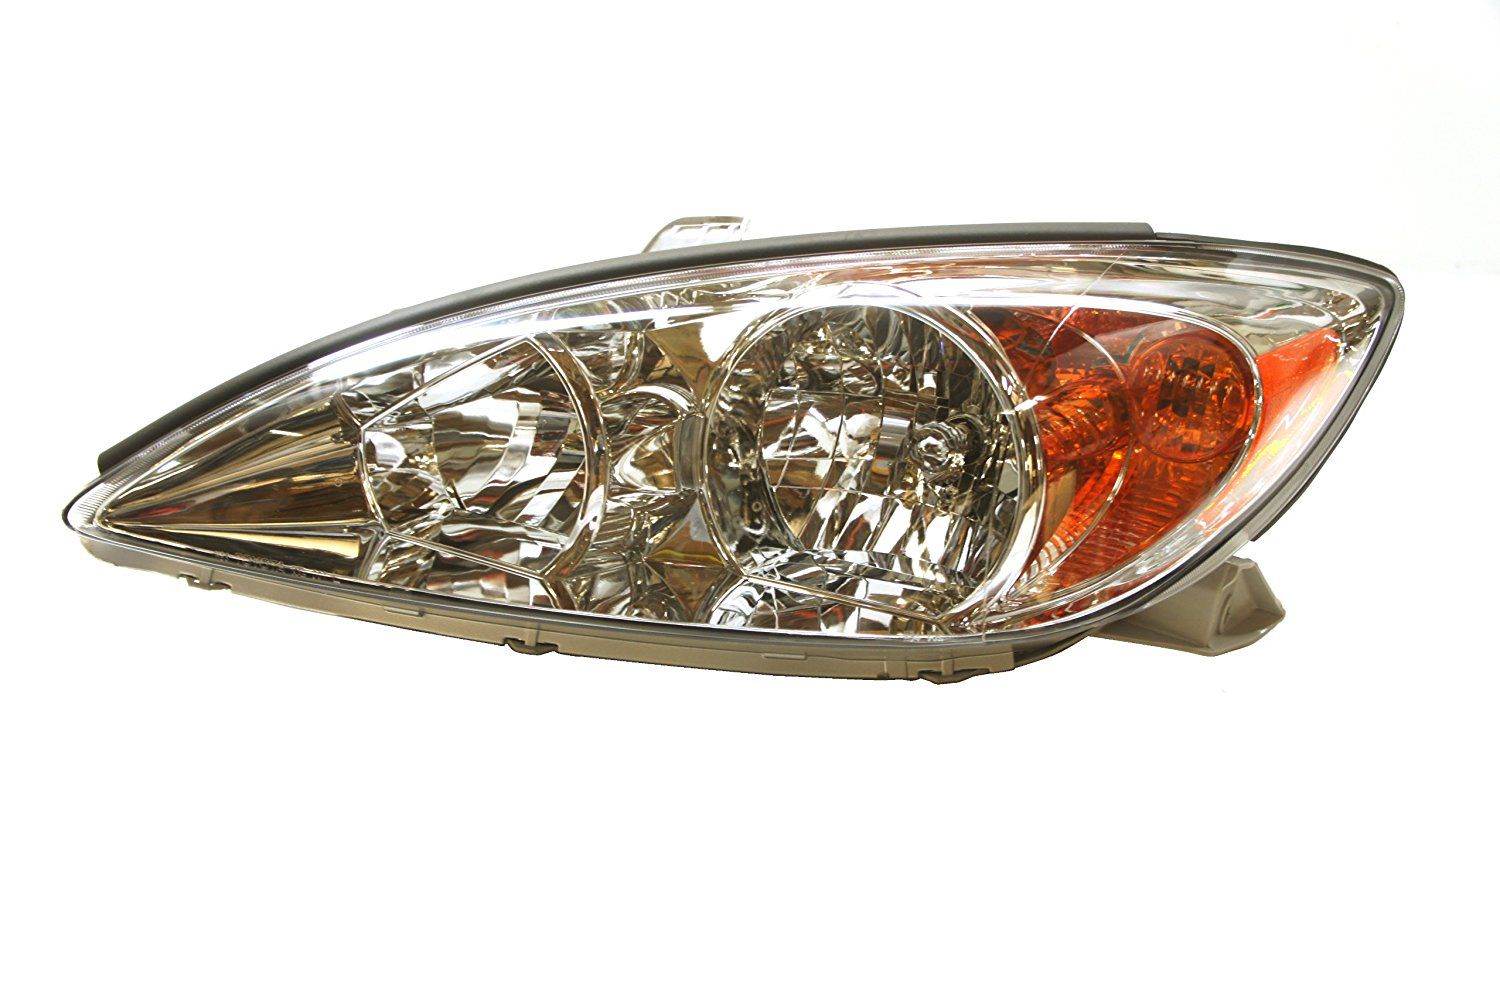 TOYOTA CAMRY 2002 BASE HEADLIGHTS LAMP ASSEMBLY Left SIDE 81150-AA060